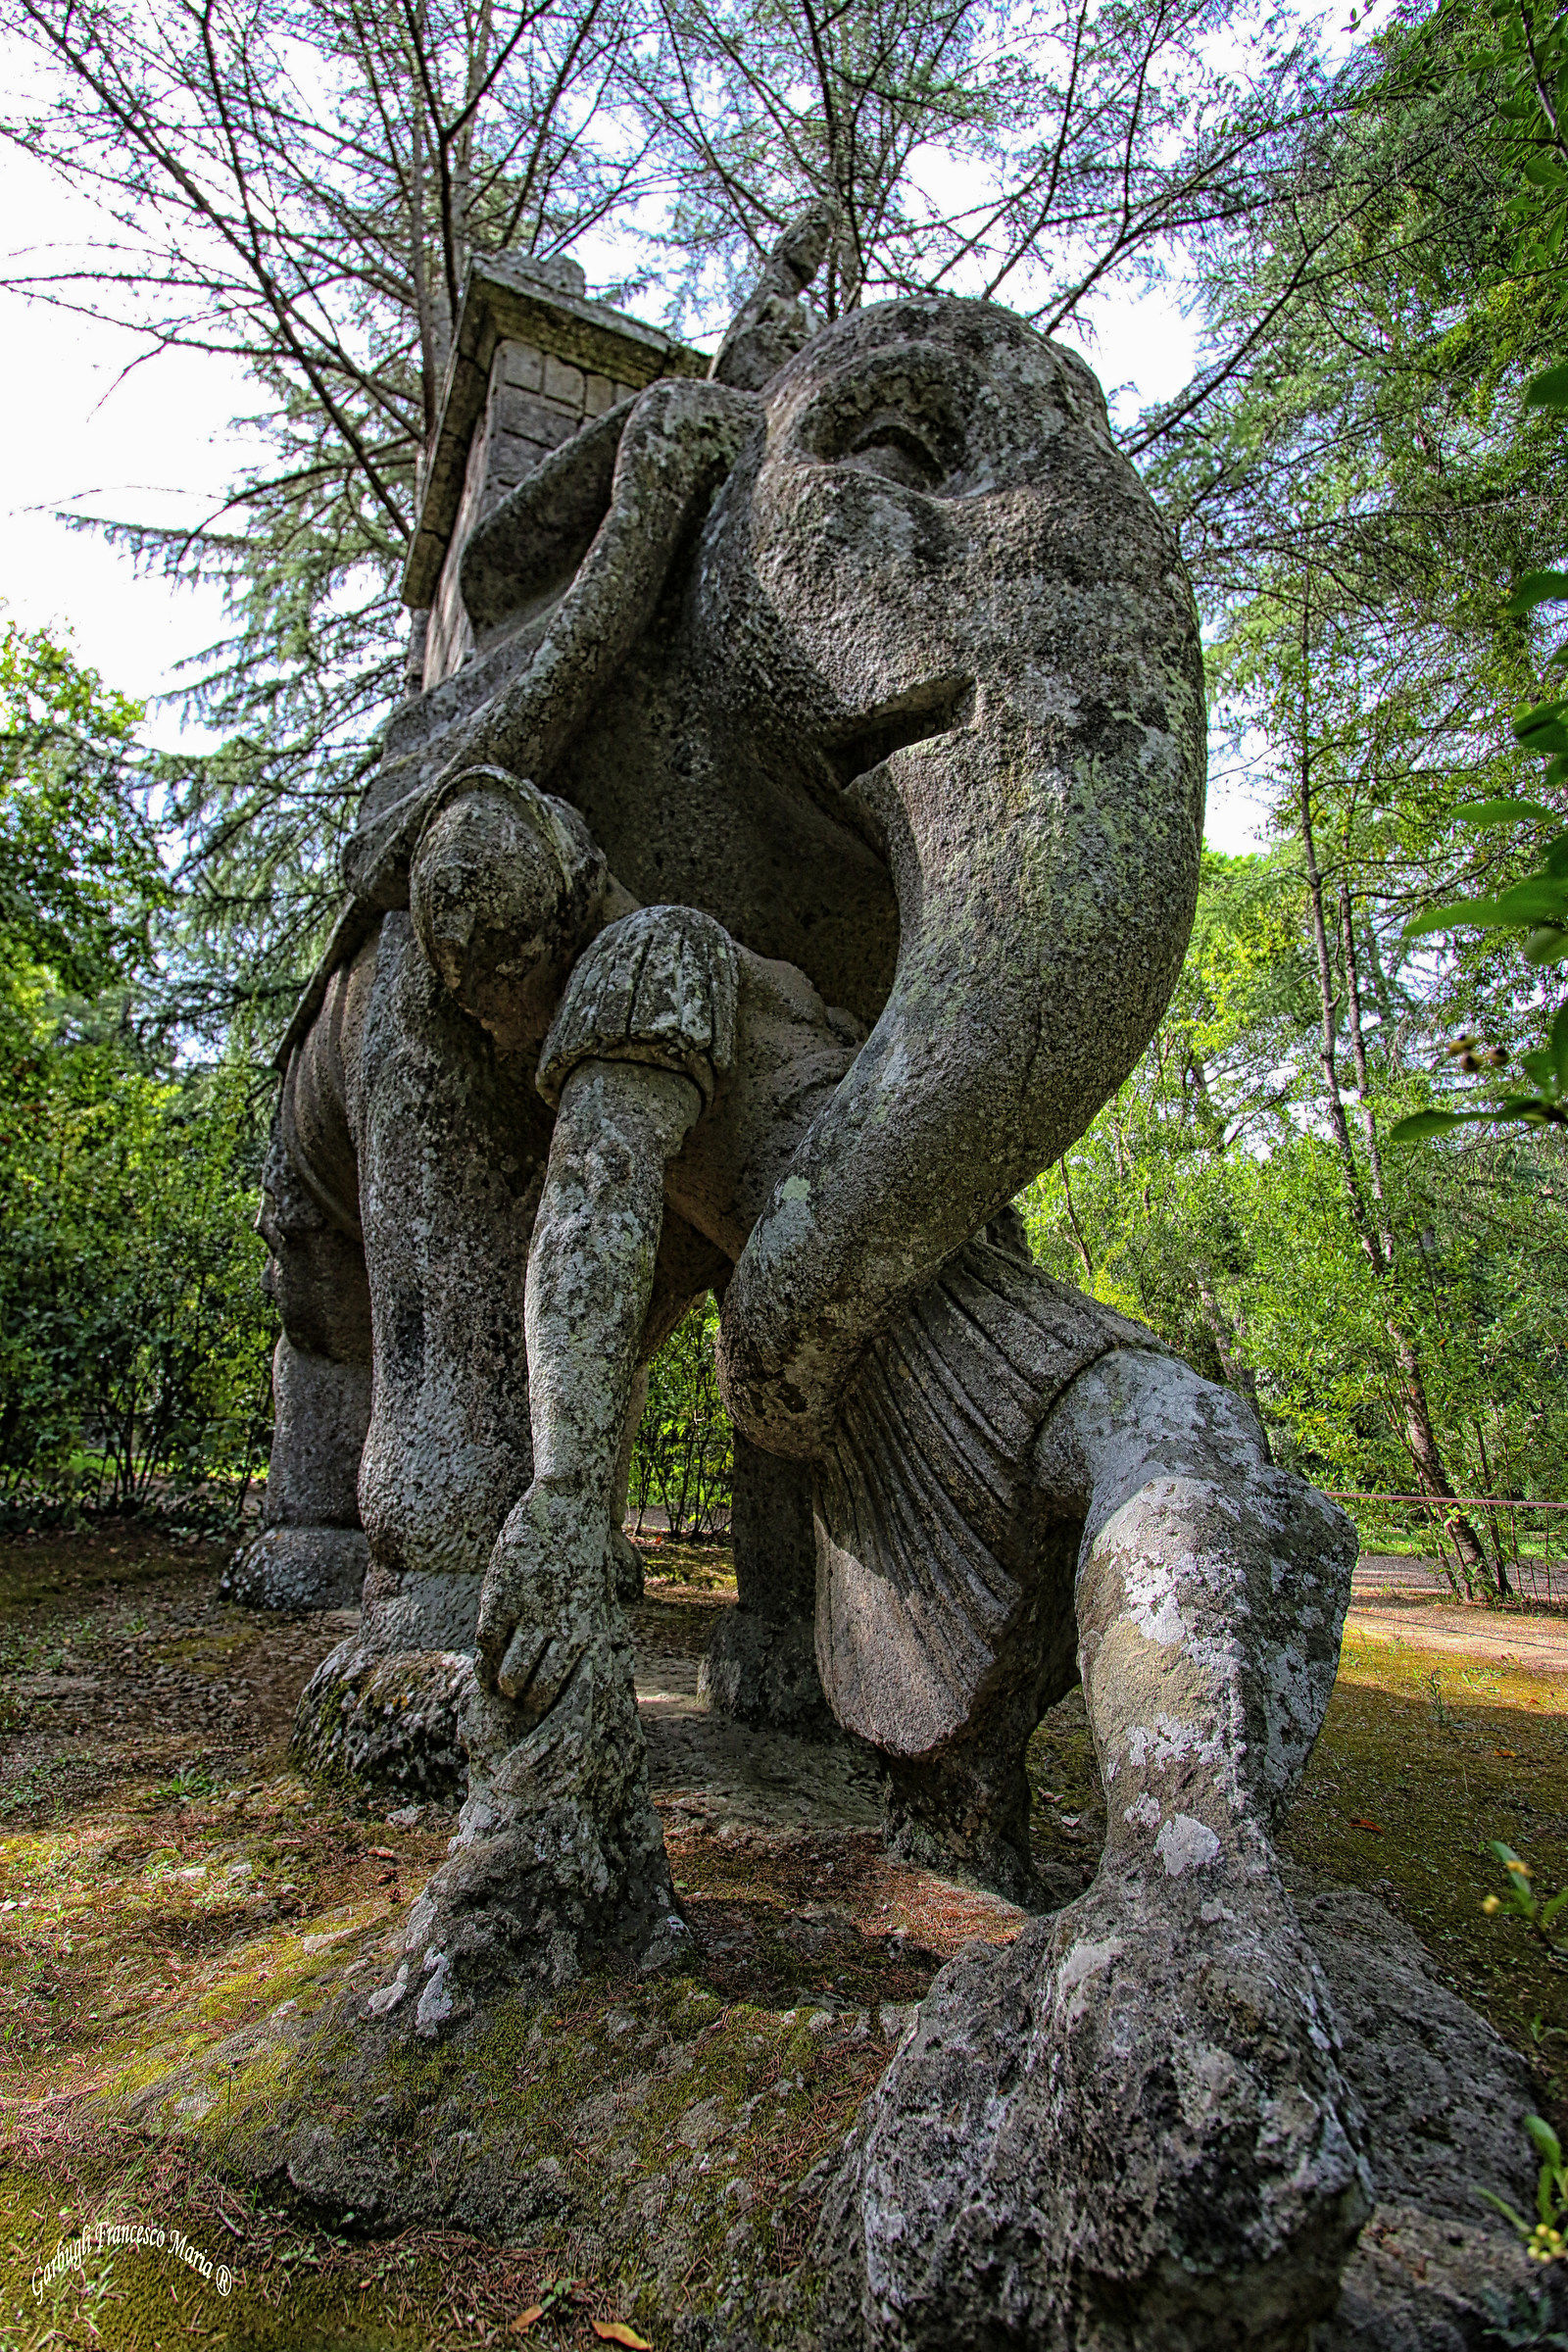 The elephant Monster Park in Bomarzo...